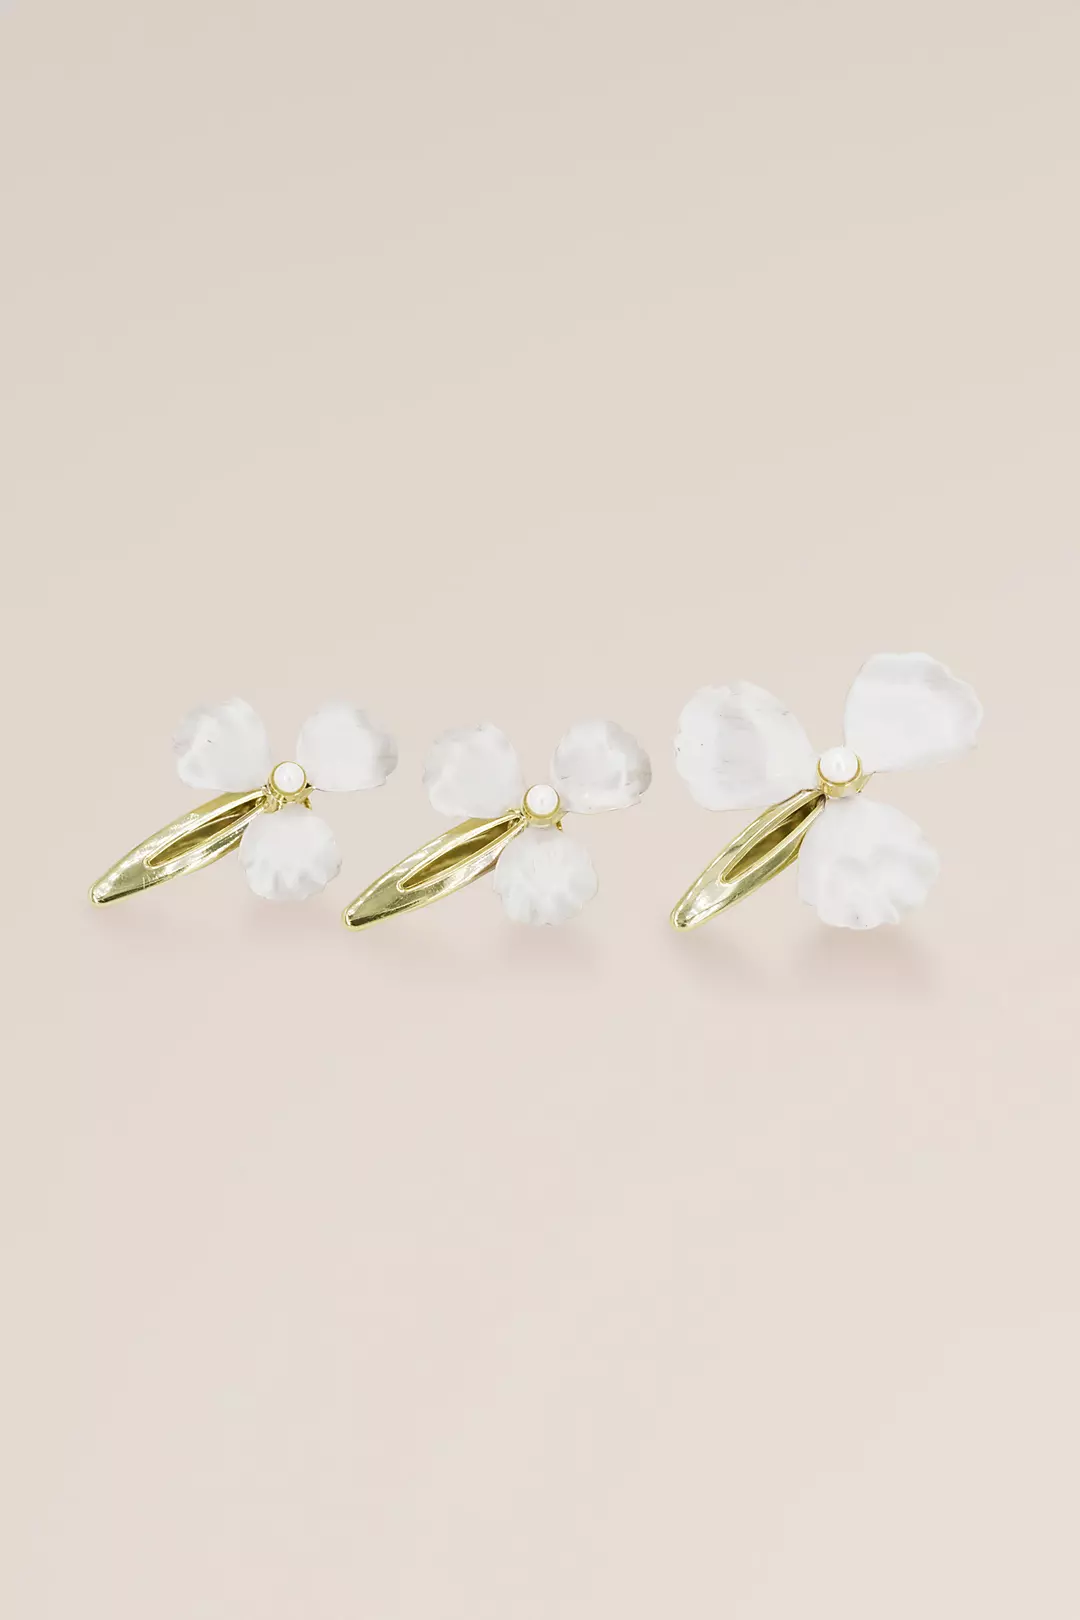 Whitewashed Petal Hair Clip Set with Pearl Accents Image 3